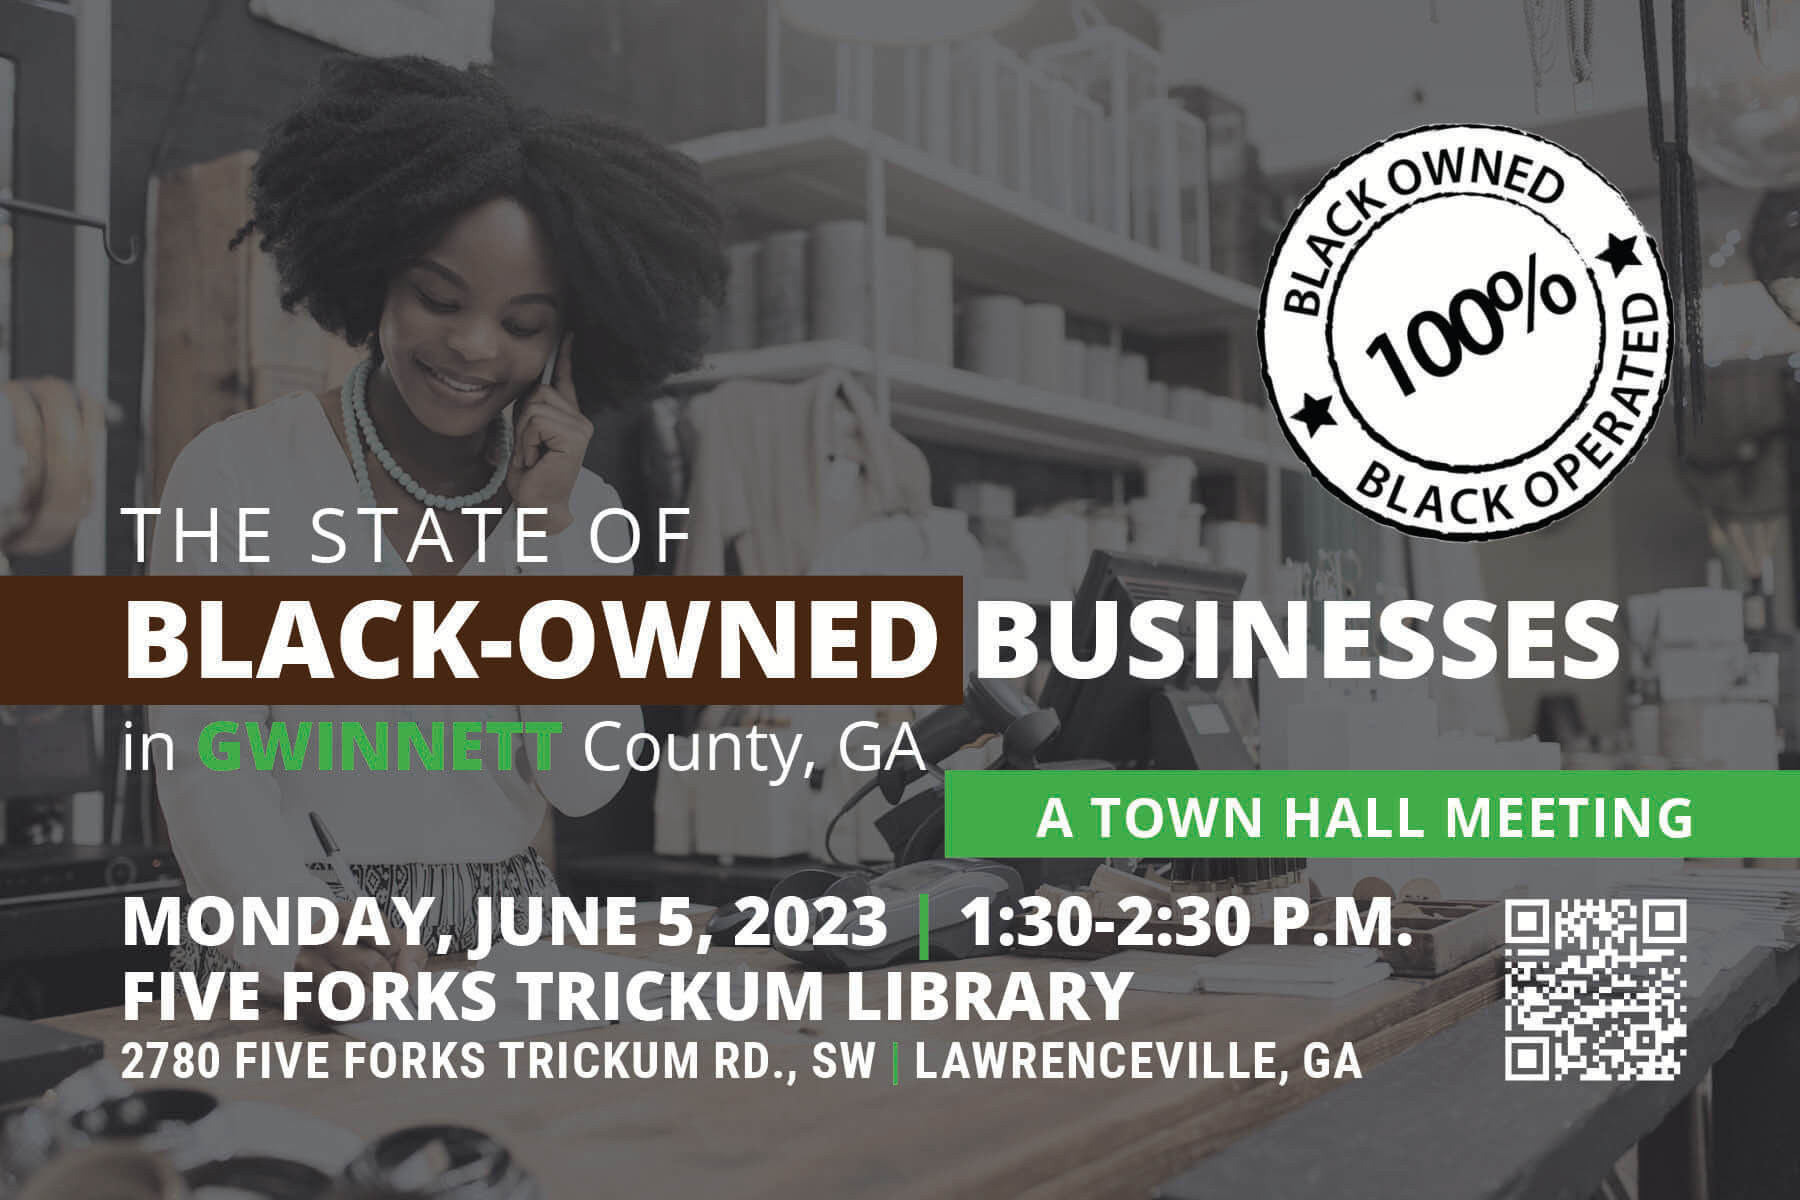 State of Black-owned businesses in gwinnett county